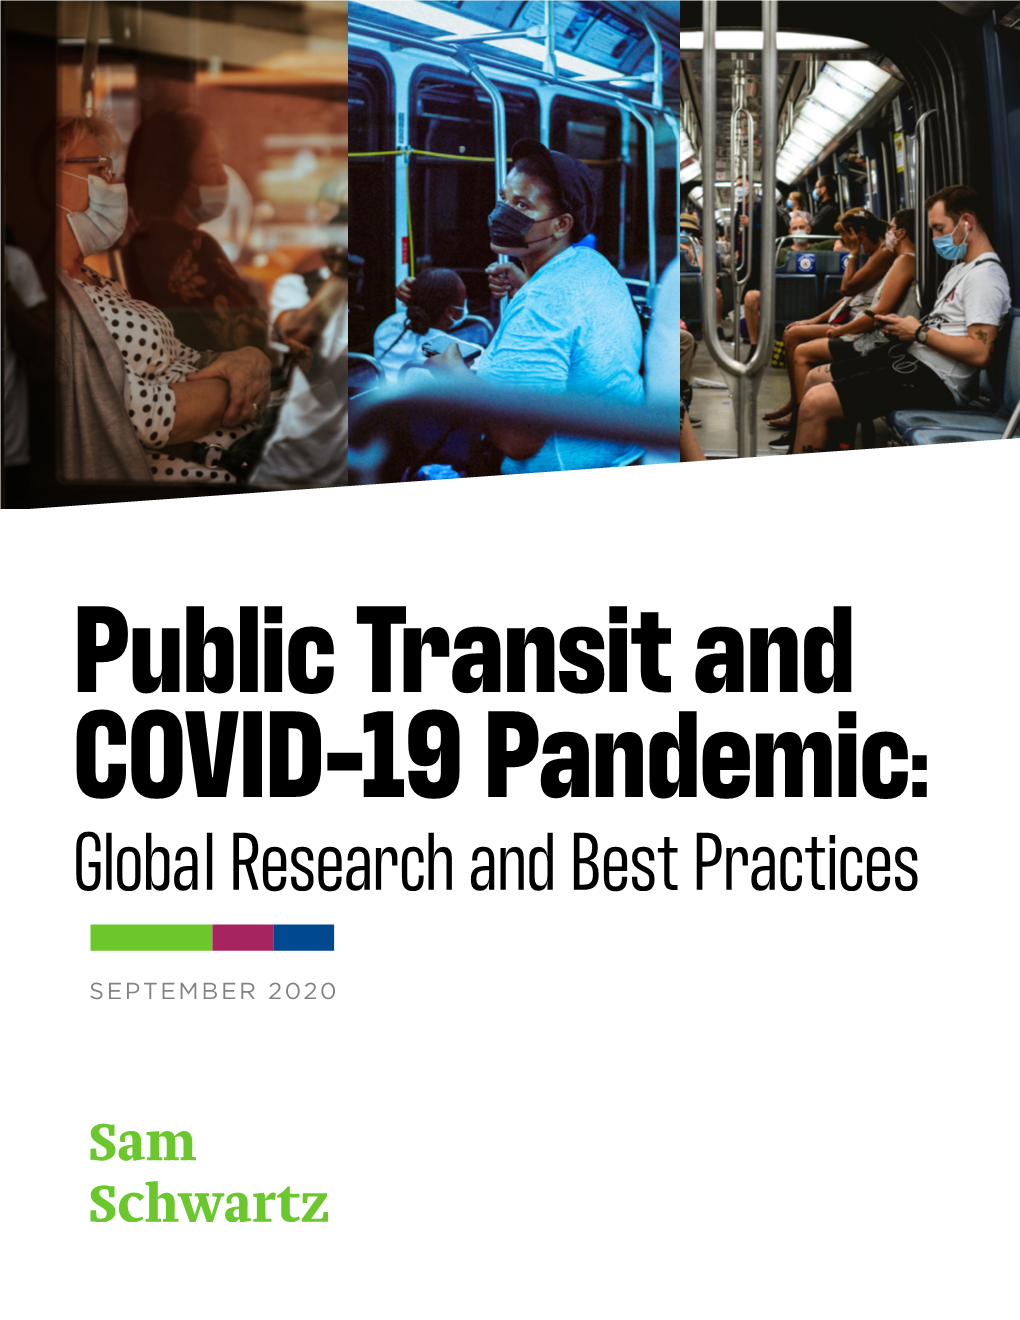 Public Transit and COVID-19 Pandemic: Global Research and Best Practices